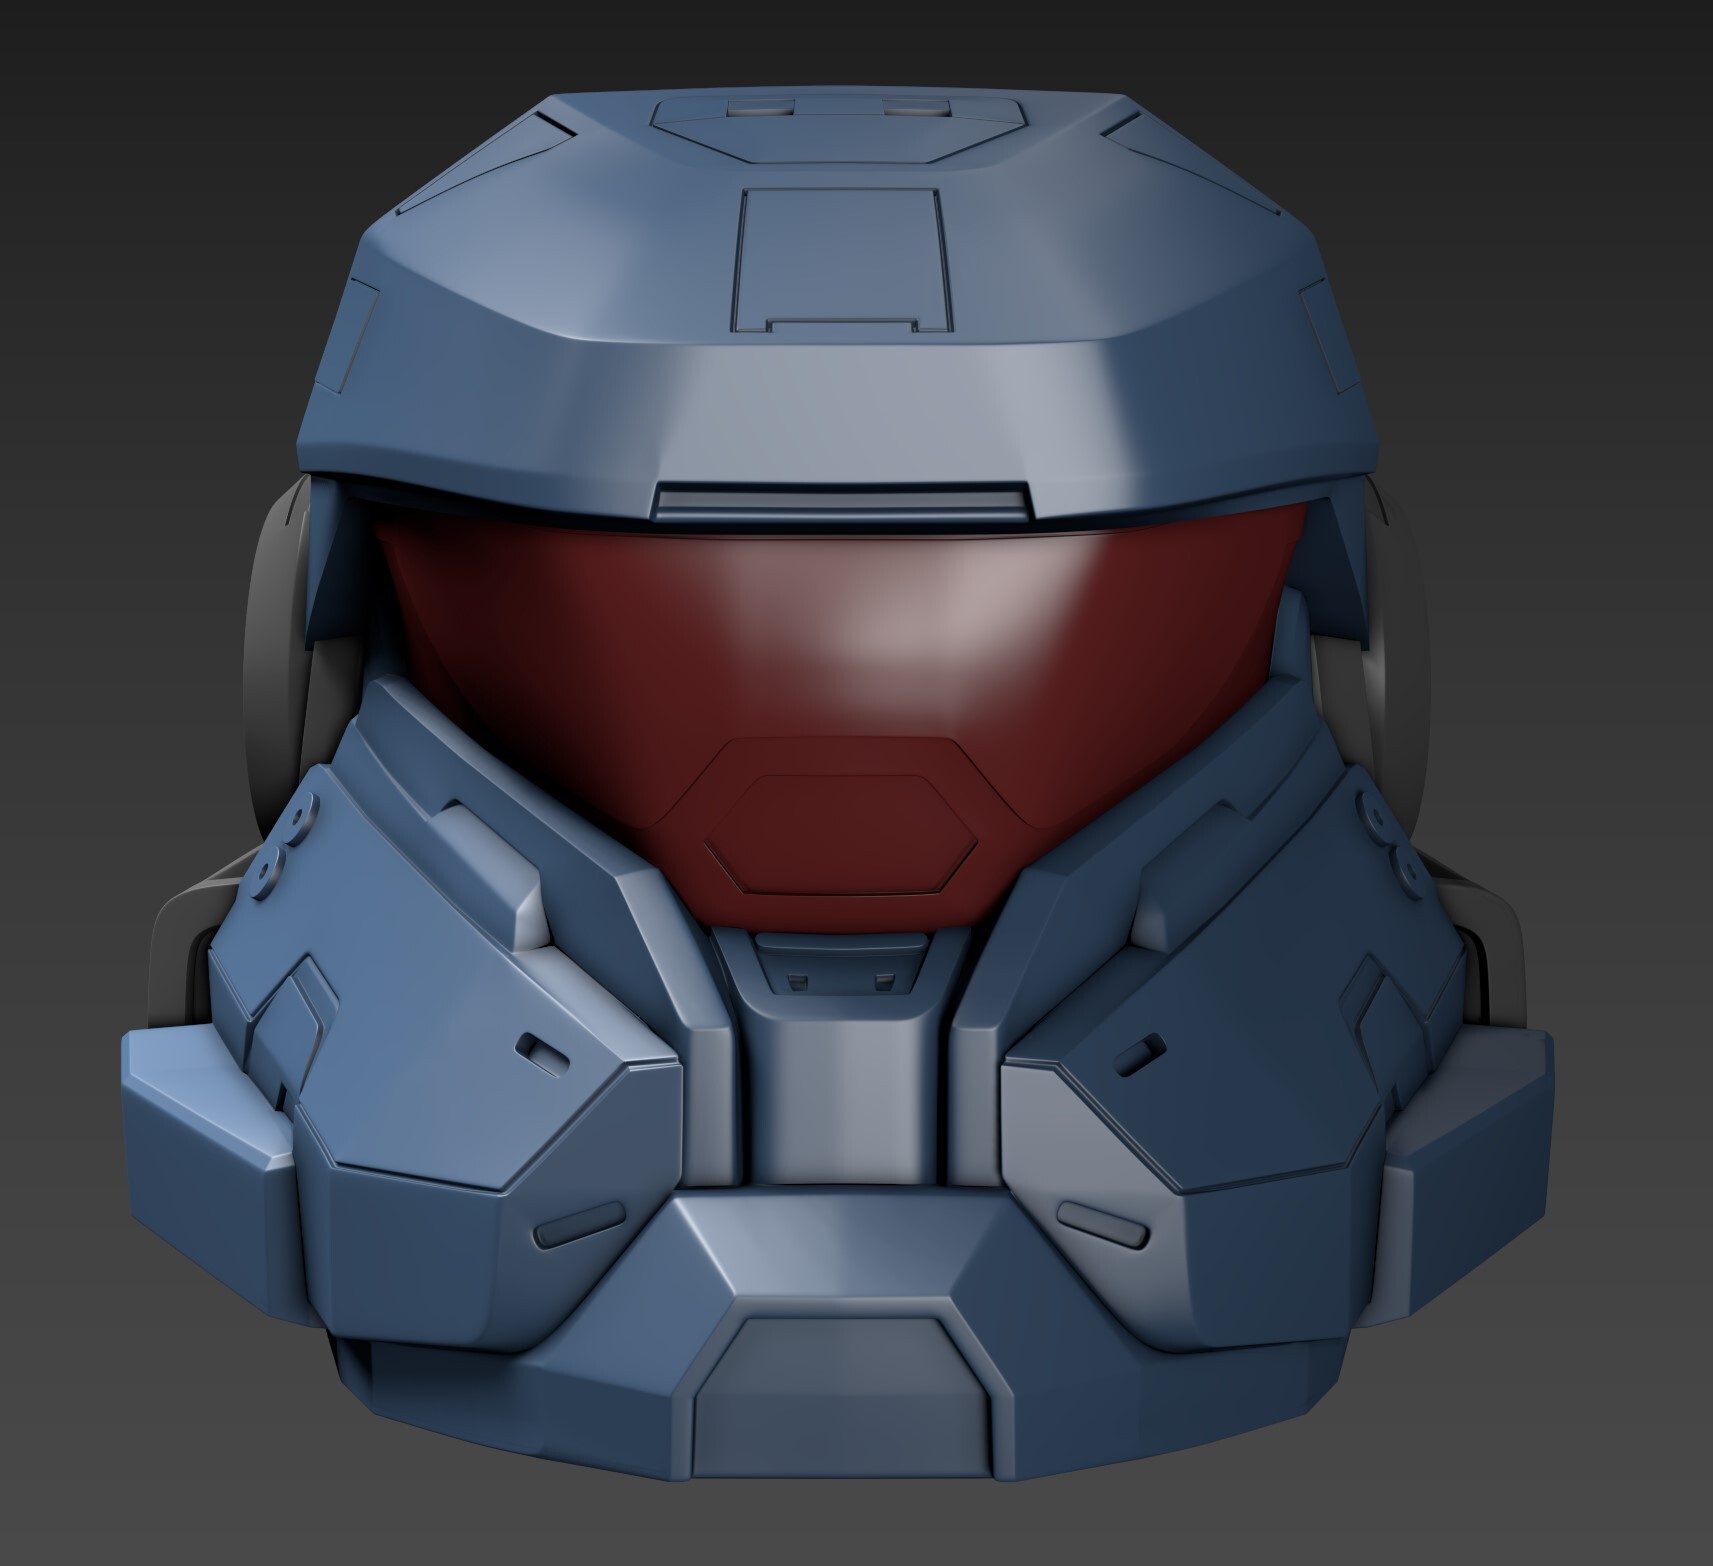 Halo 5 Master Chief Helmet for Cosplay 3D model 3D printable